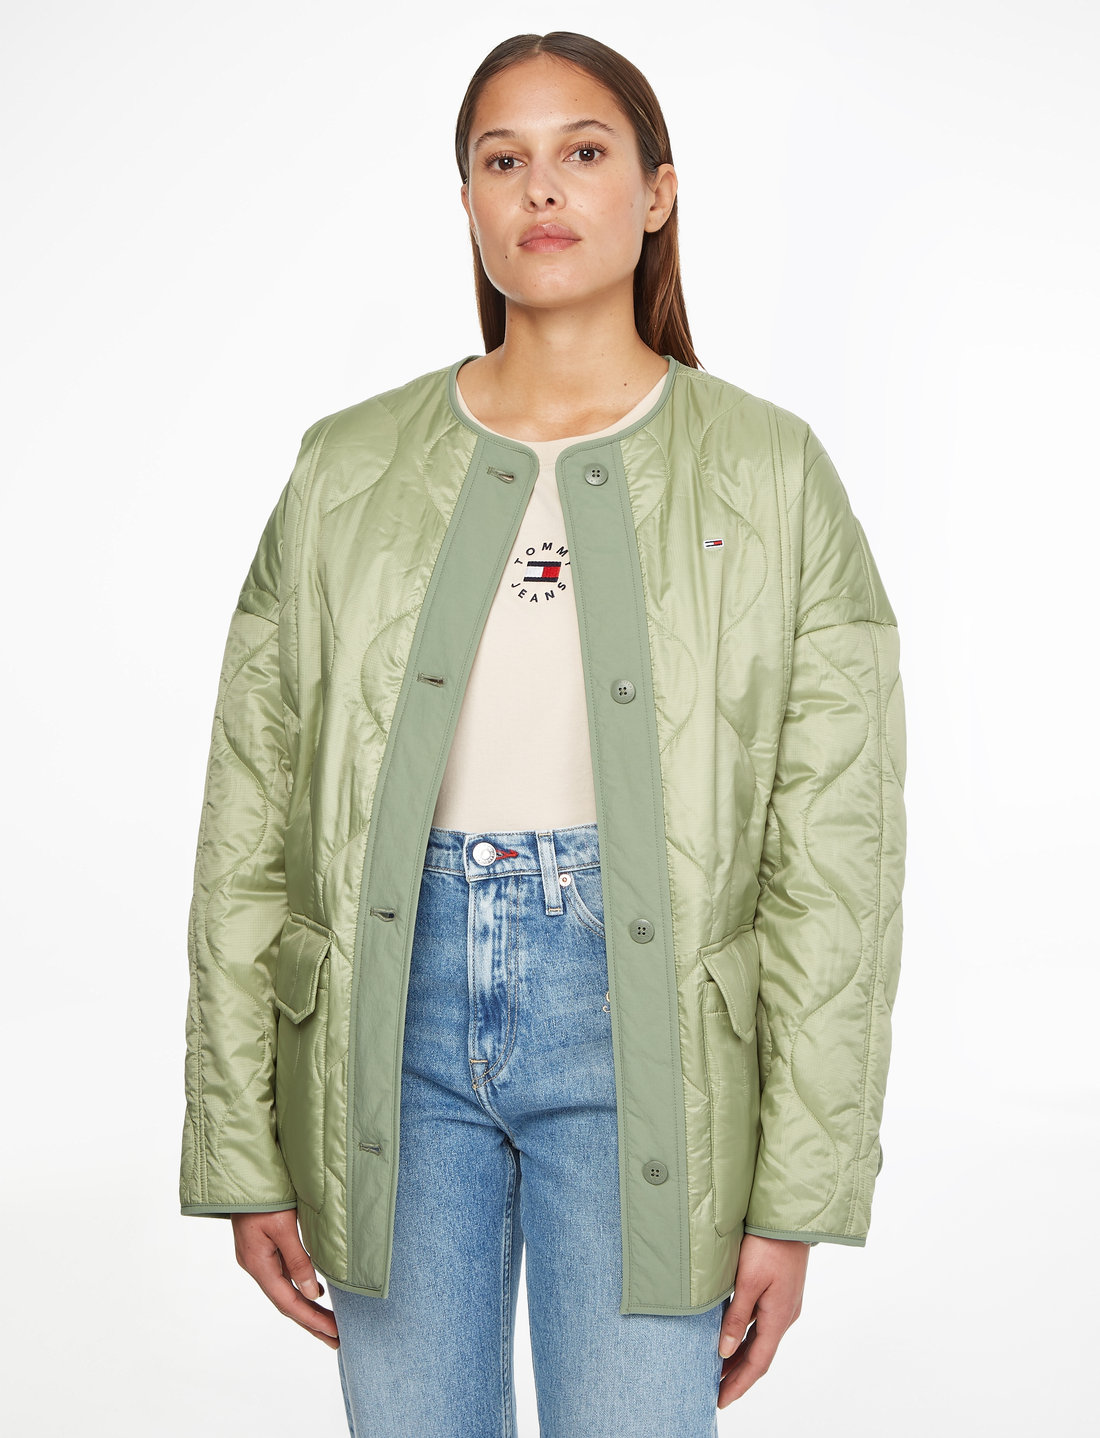 letterlijk Onderzoek servet Tommy Jeans Tjw Oversize Onion Quilt Jacket - 179.90 €. Buy Quilted jackets  from Tommy Jeans online at Boozt.com. Fast delivery and easy returns